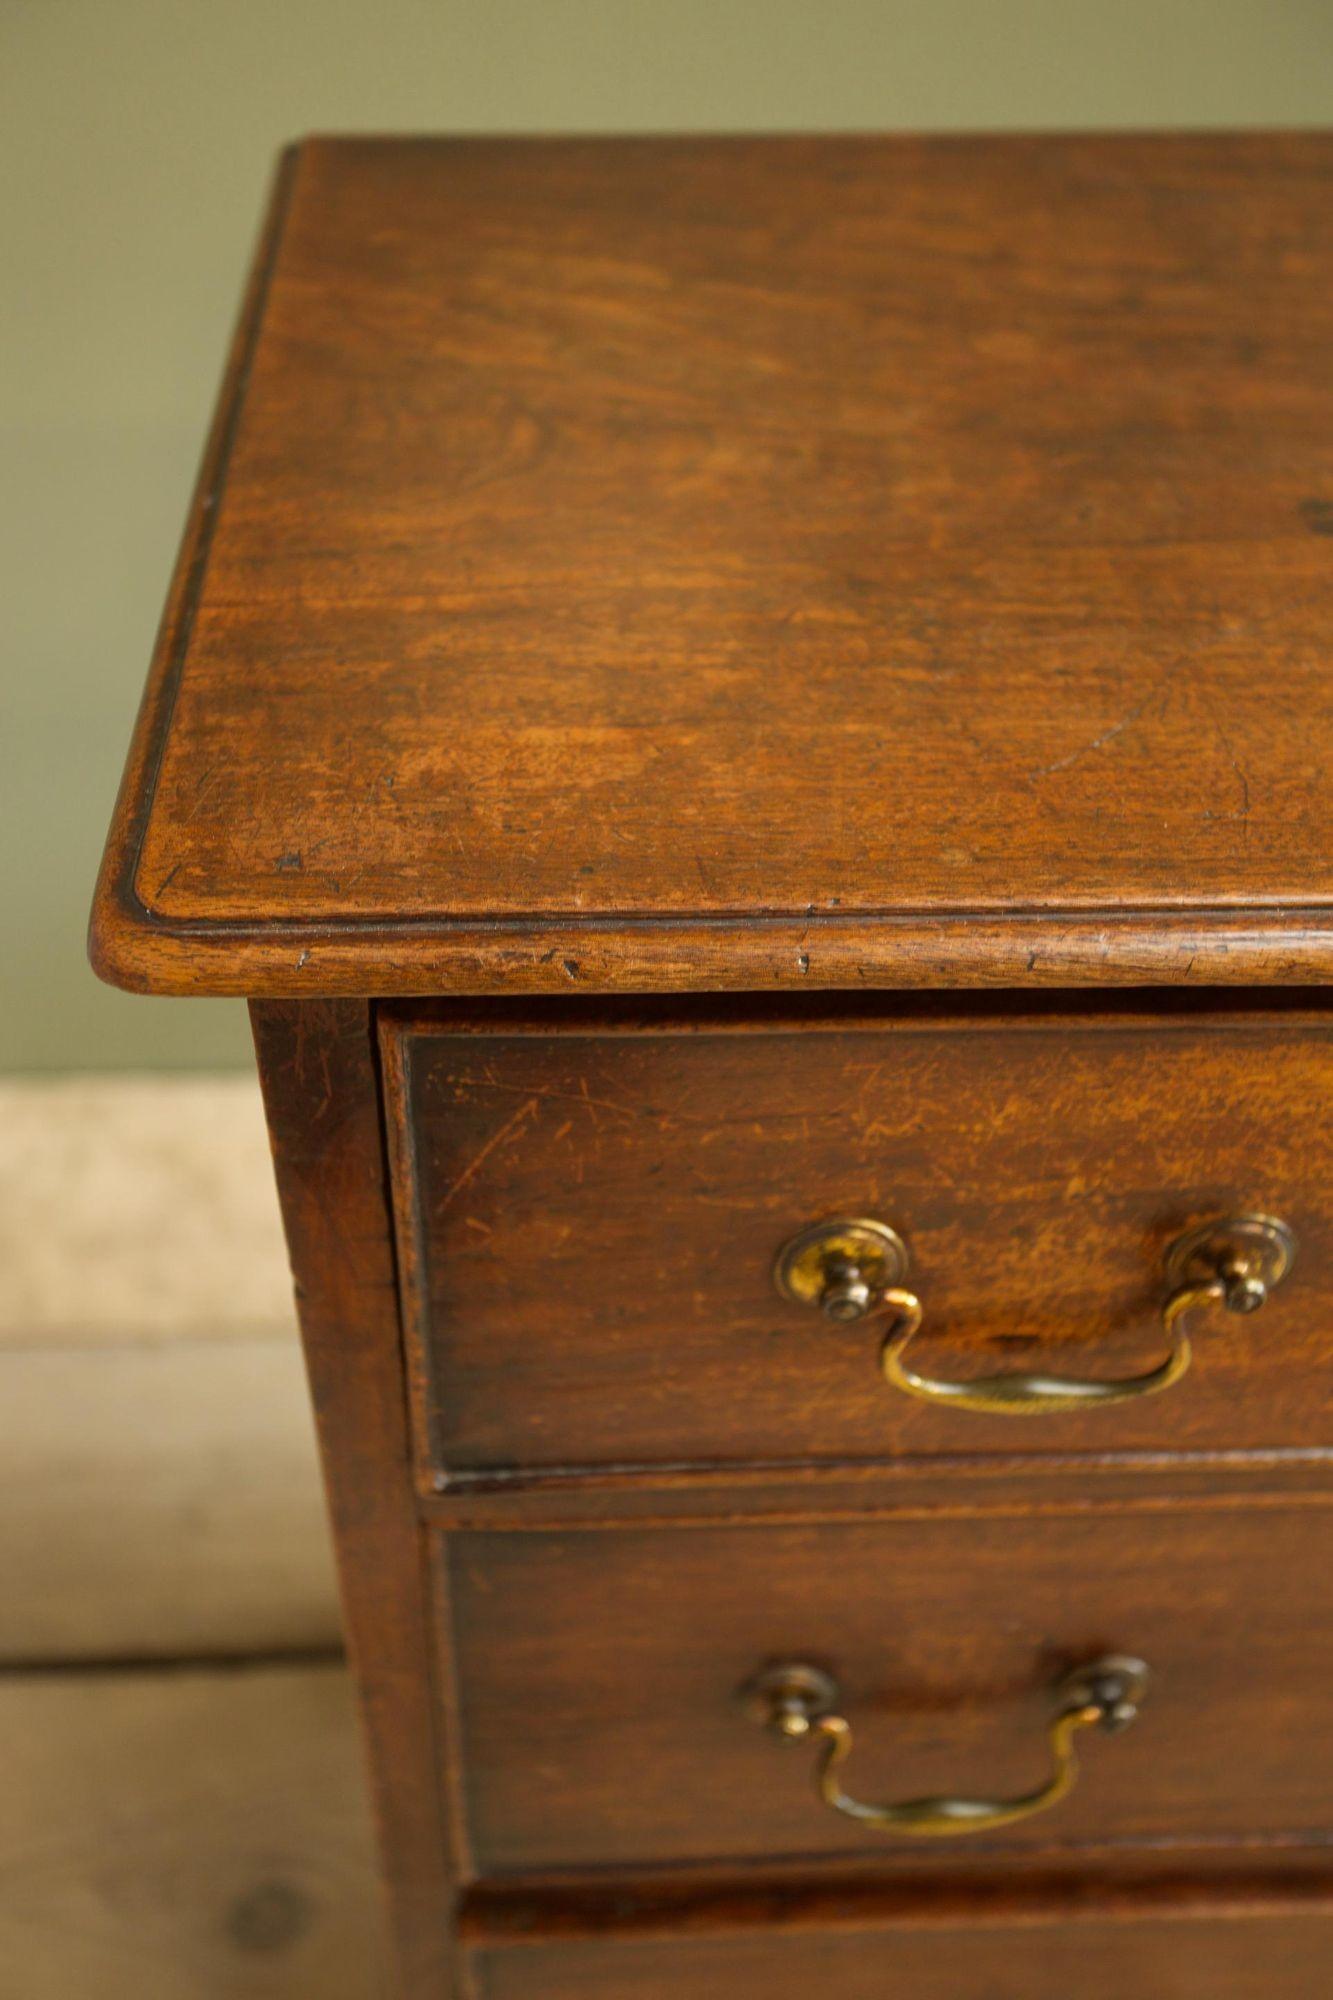 This is a very sweet Georgian mahogany chest of drawers. Smaller than average proportions and in nice original condition. The wear on the piece is very attractive and gives the piece a worn easy to place feel. The drawers all run smooth and the feet